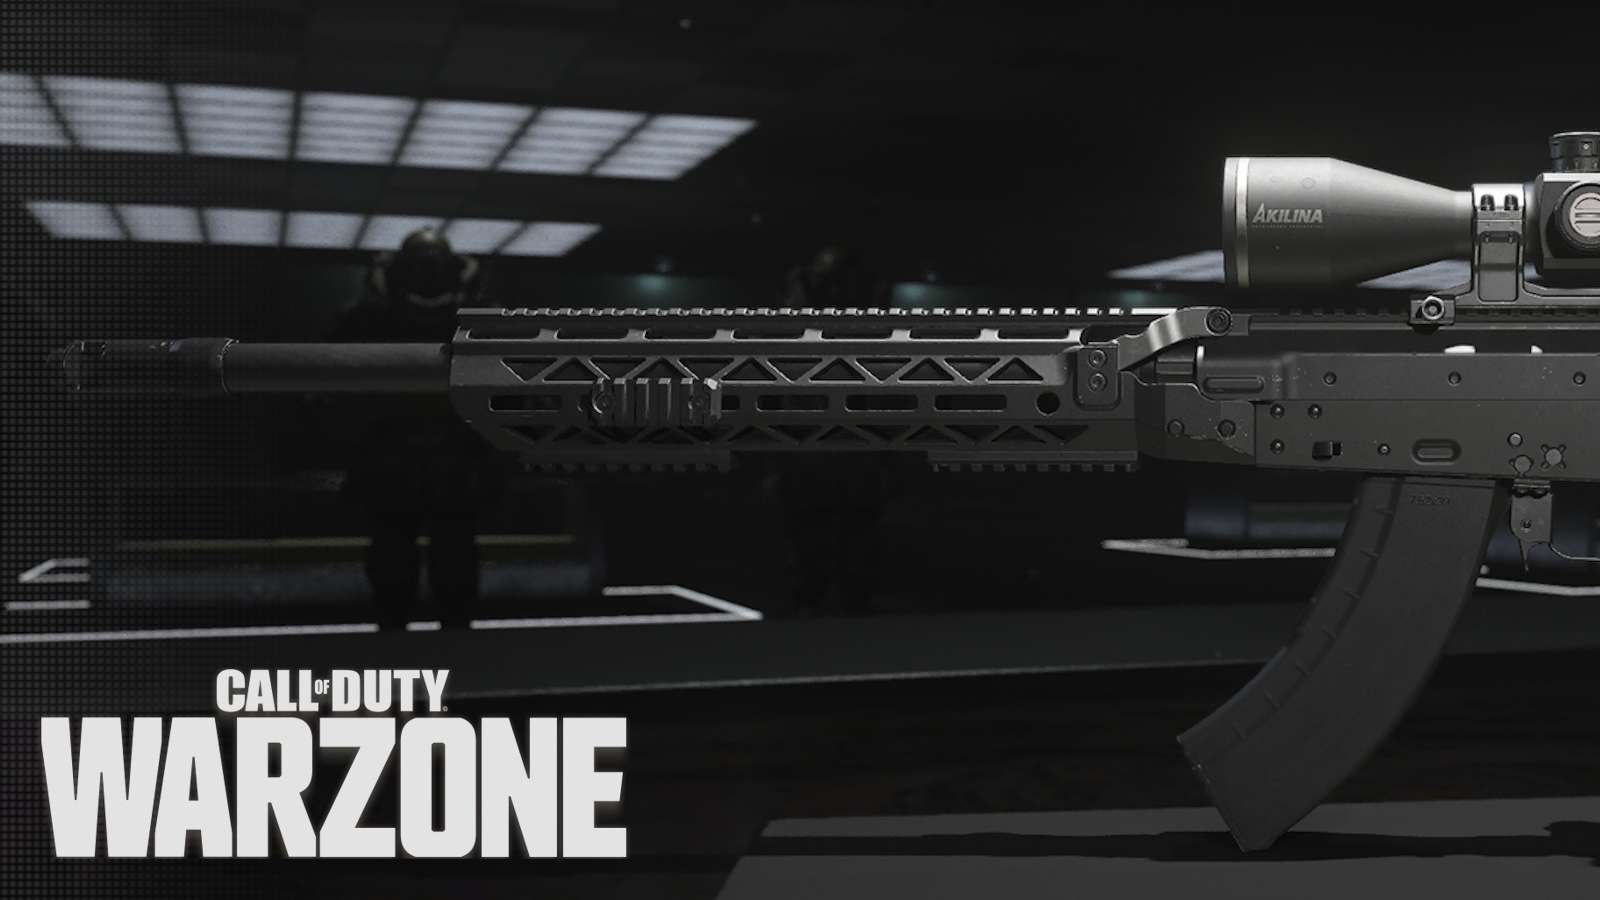 Longbow sniper rifle with Warzone logo.